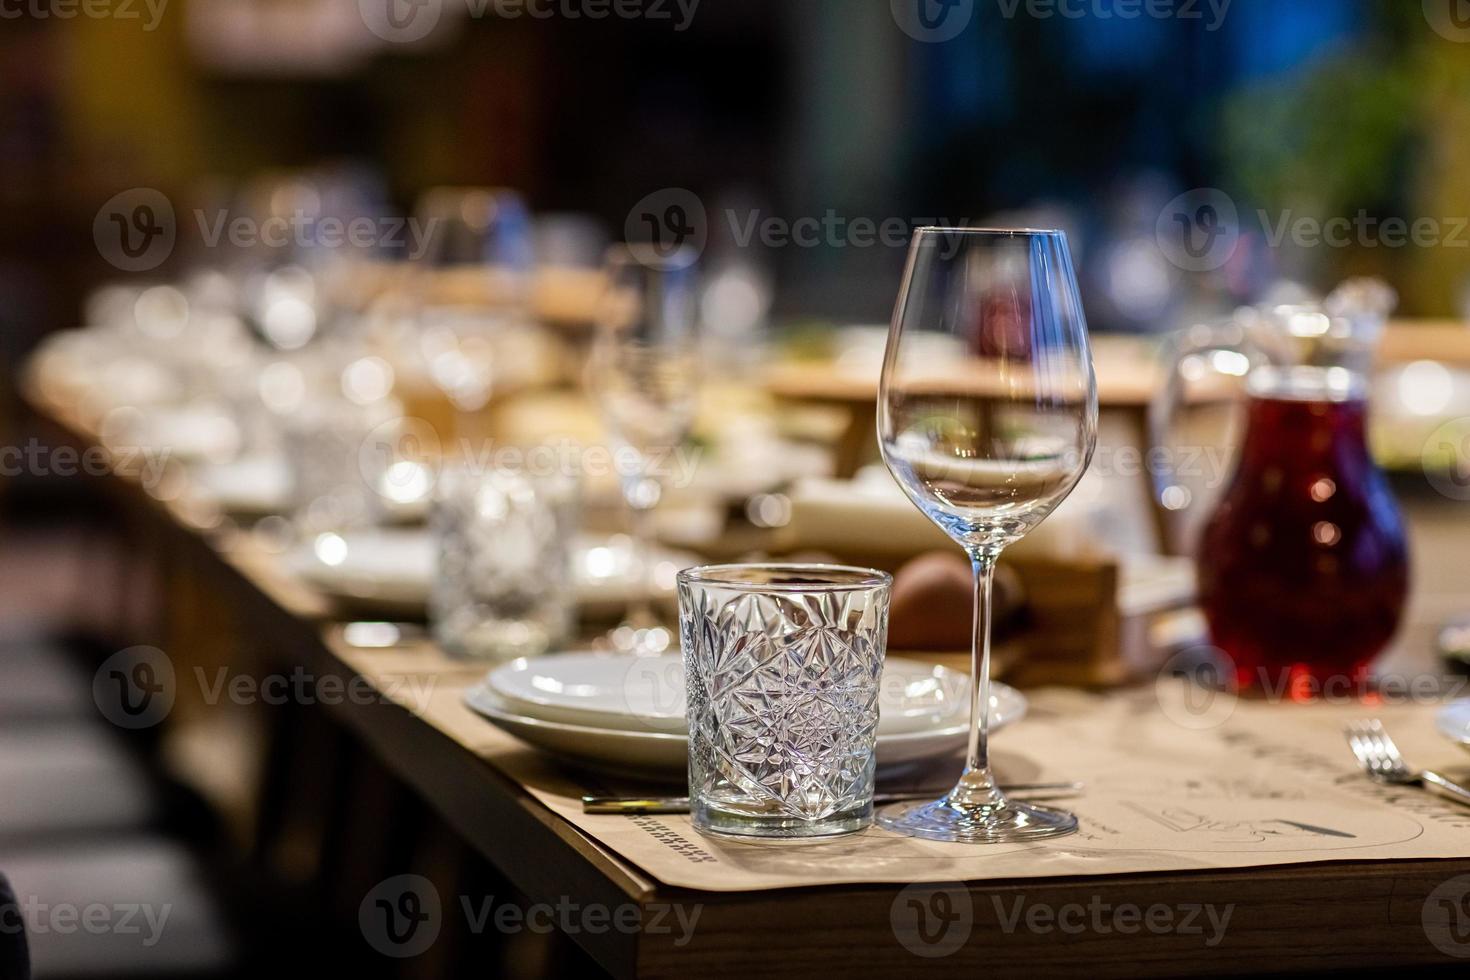 Tables set for an event party or wedding reception. luxury elegant table setting dinner in a restaurant. glasses and dishes. Empty glasses set in restaurant. Part of interior photo